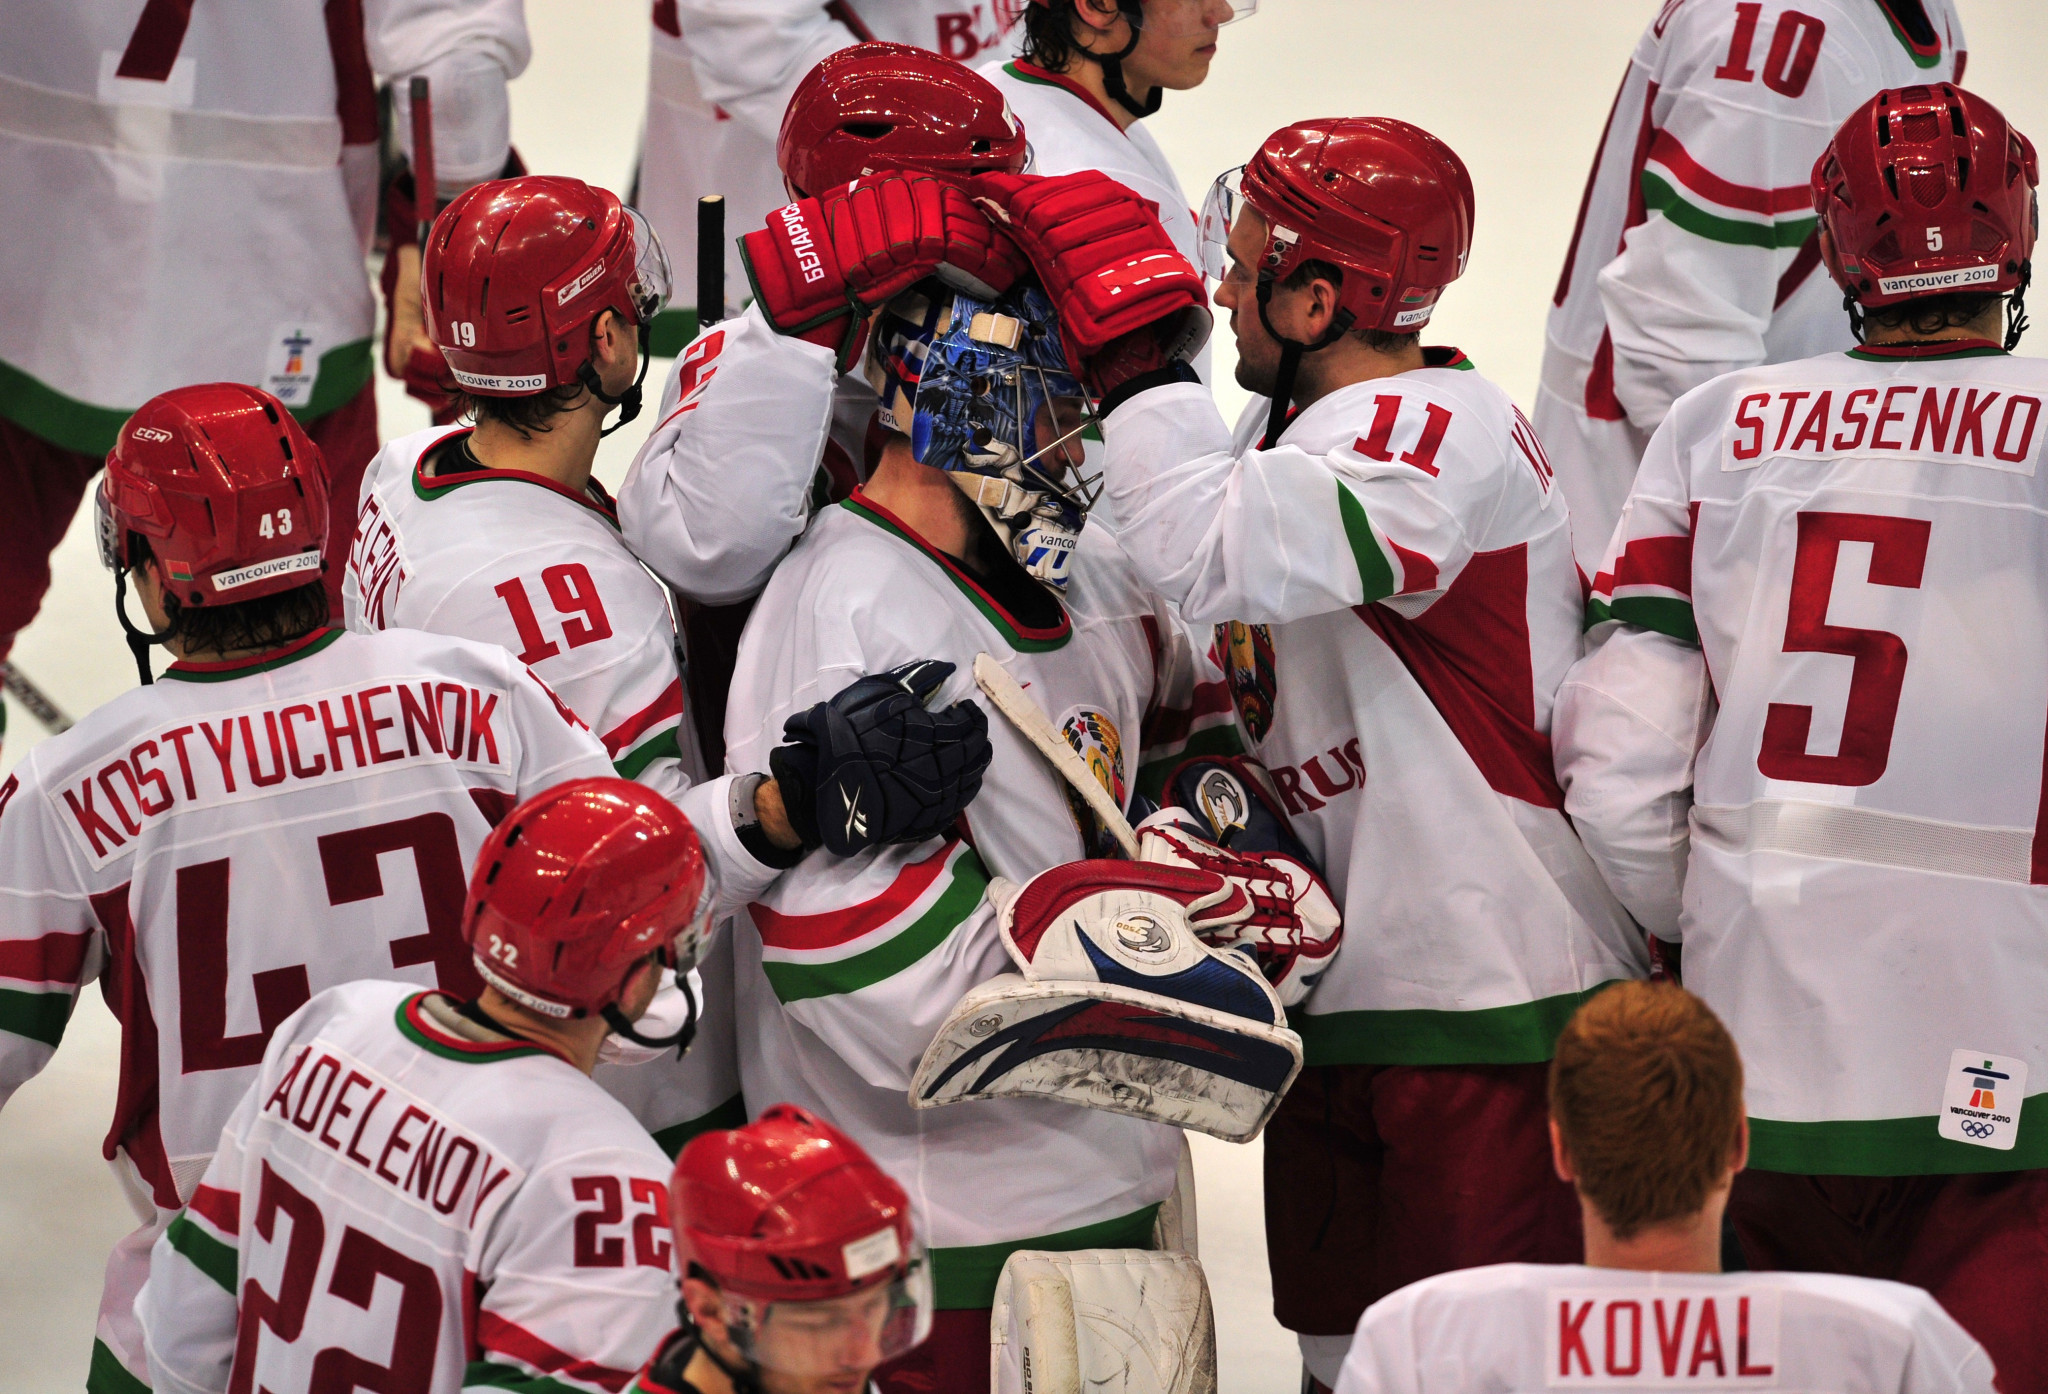 Mikhail Zakharov coached Belarus during the Vancouver 2010 Olympics ©Getty Images